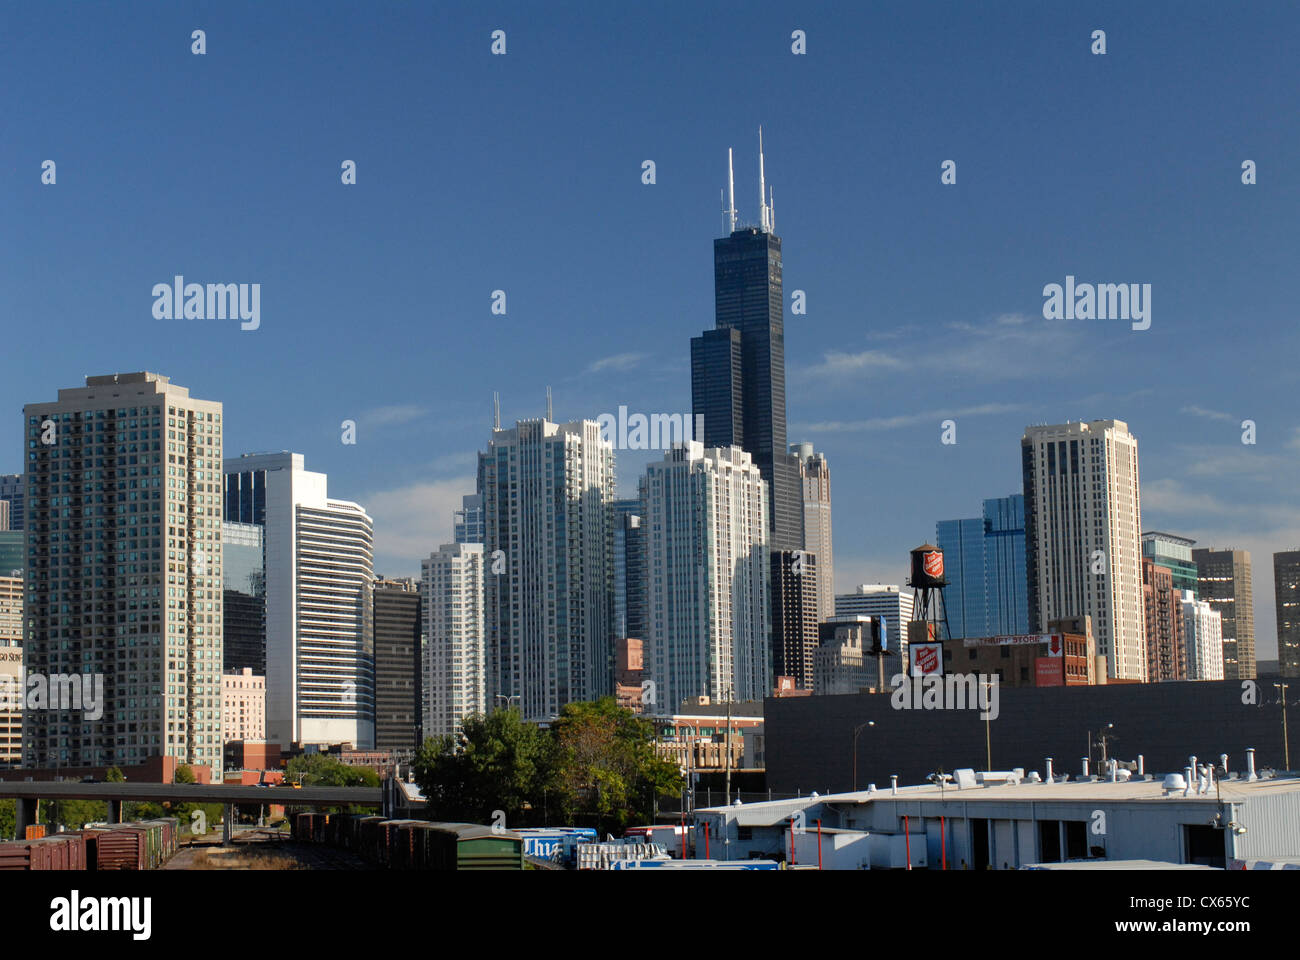 Chicago skyline, Chicago Illinois. Willis Tower is the black building. Stock Photo